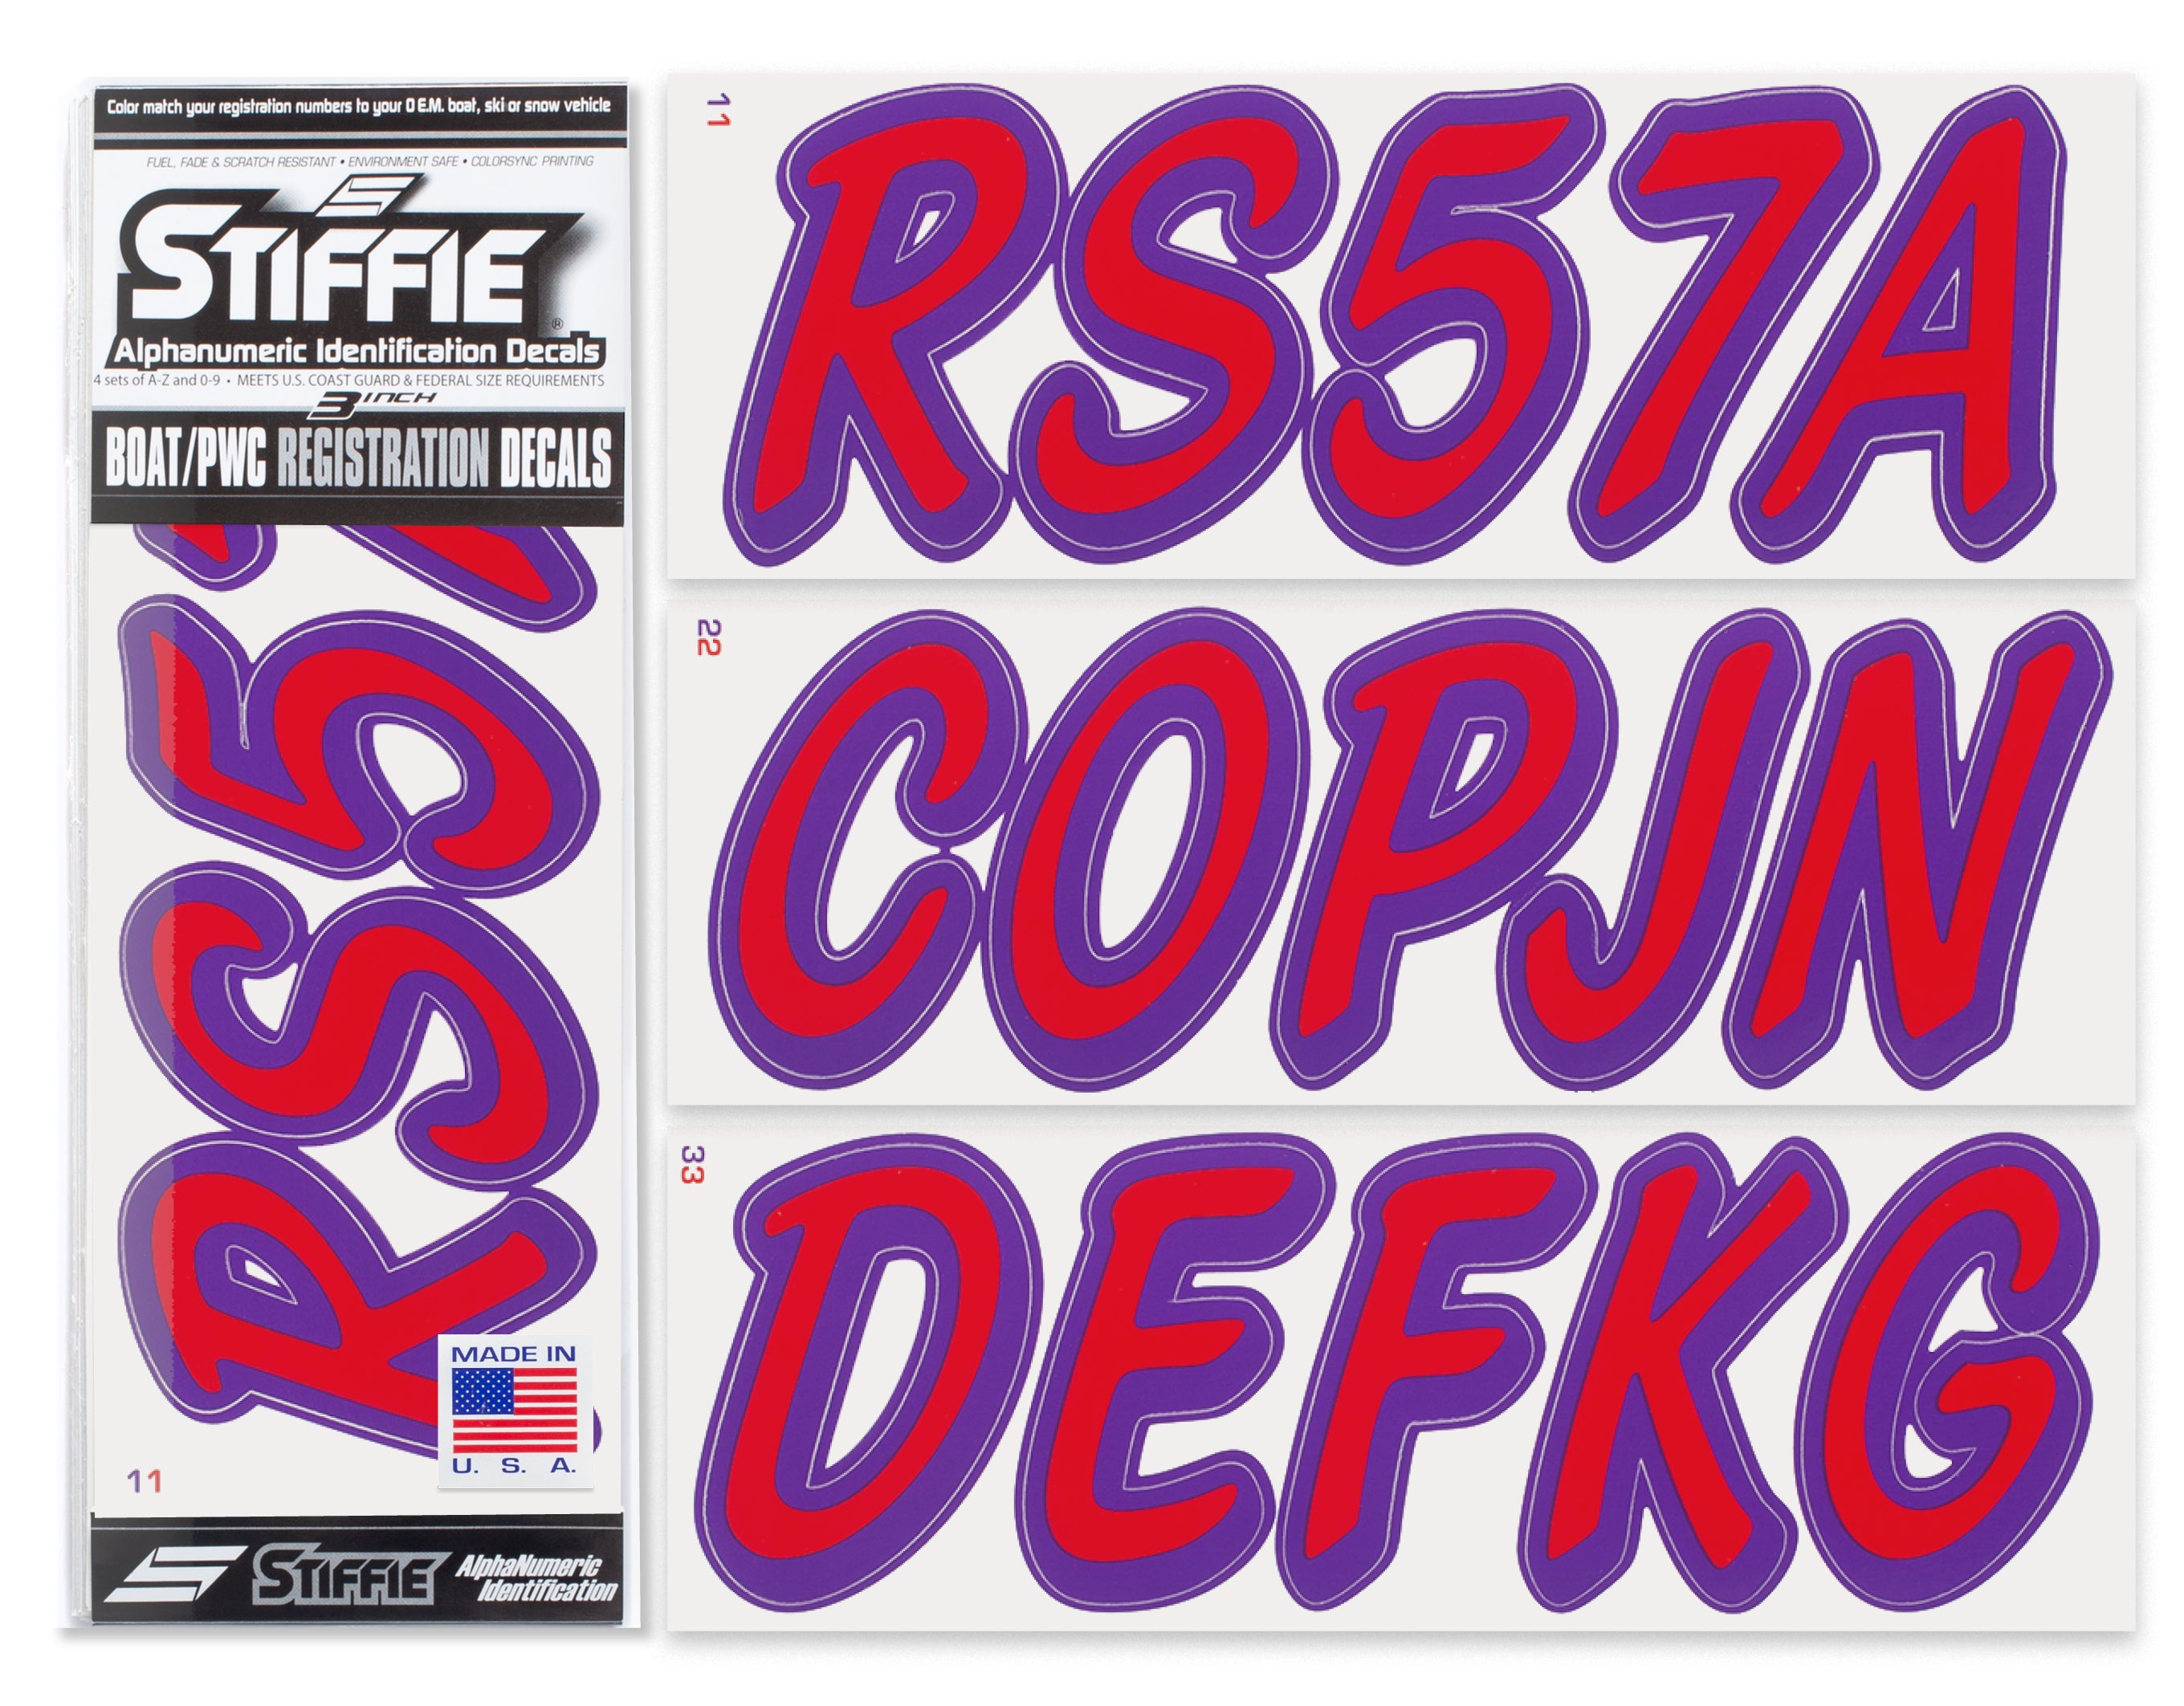 STIFFIE Whipline Solid Red/Purple 3" Alpha-Numeric Registration Identification Numbers Stickers Decals for Boats & Personal Watercraft